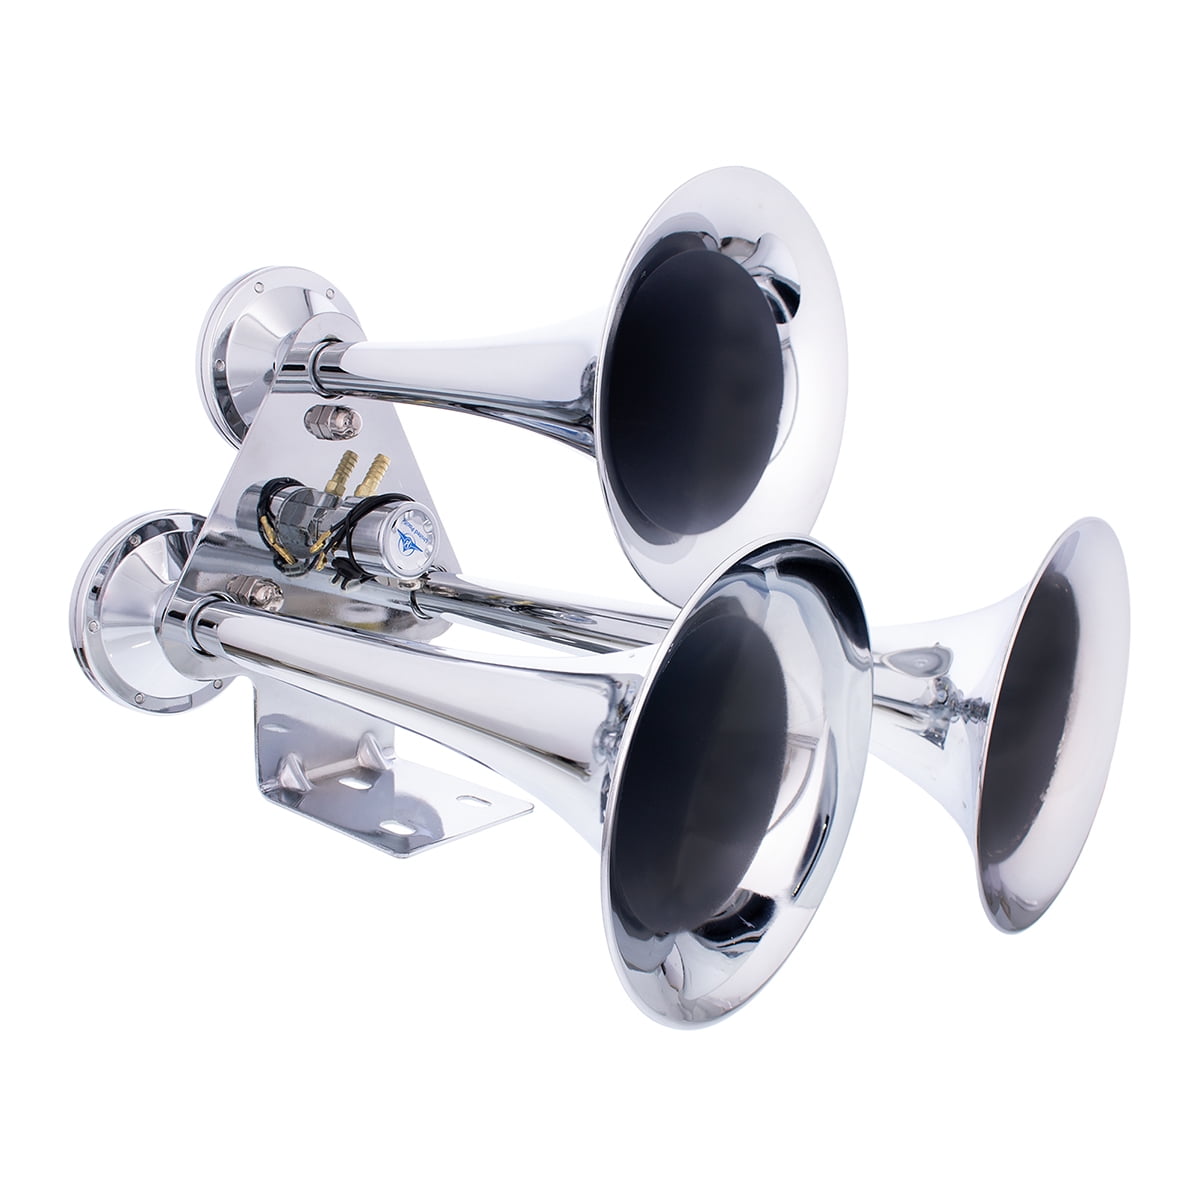  United Pacific 46129 Chrome Plated 3 Trumpet Train Horn, 12V  Heavy-Duty Electric Solenoid, 150 PSI Max, Super Loud Output 145dB +/- 10  dB - ONE Set : Musical Instruments